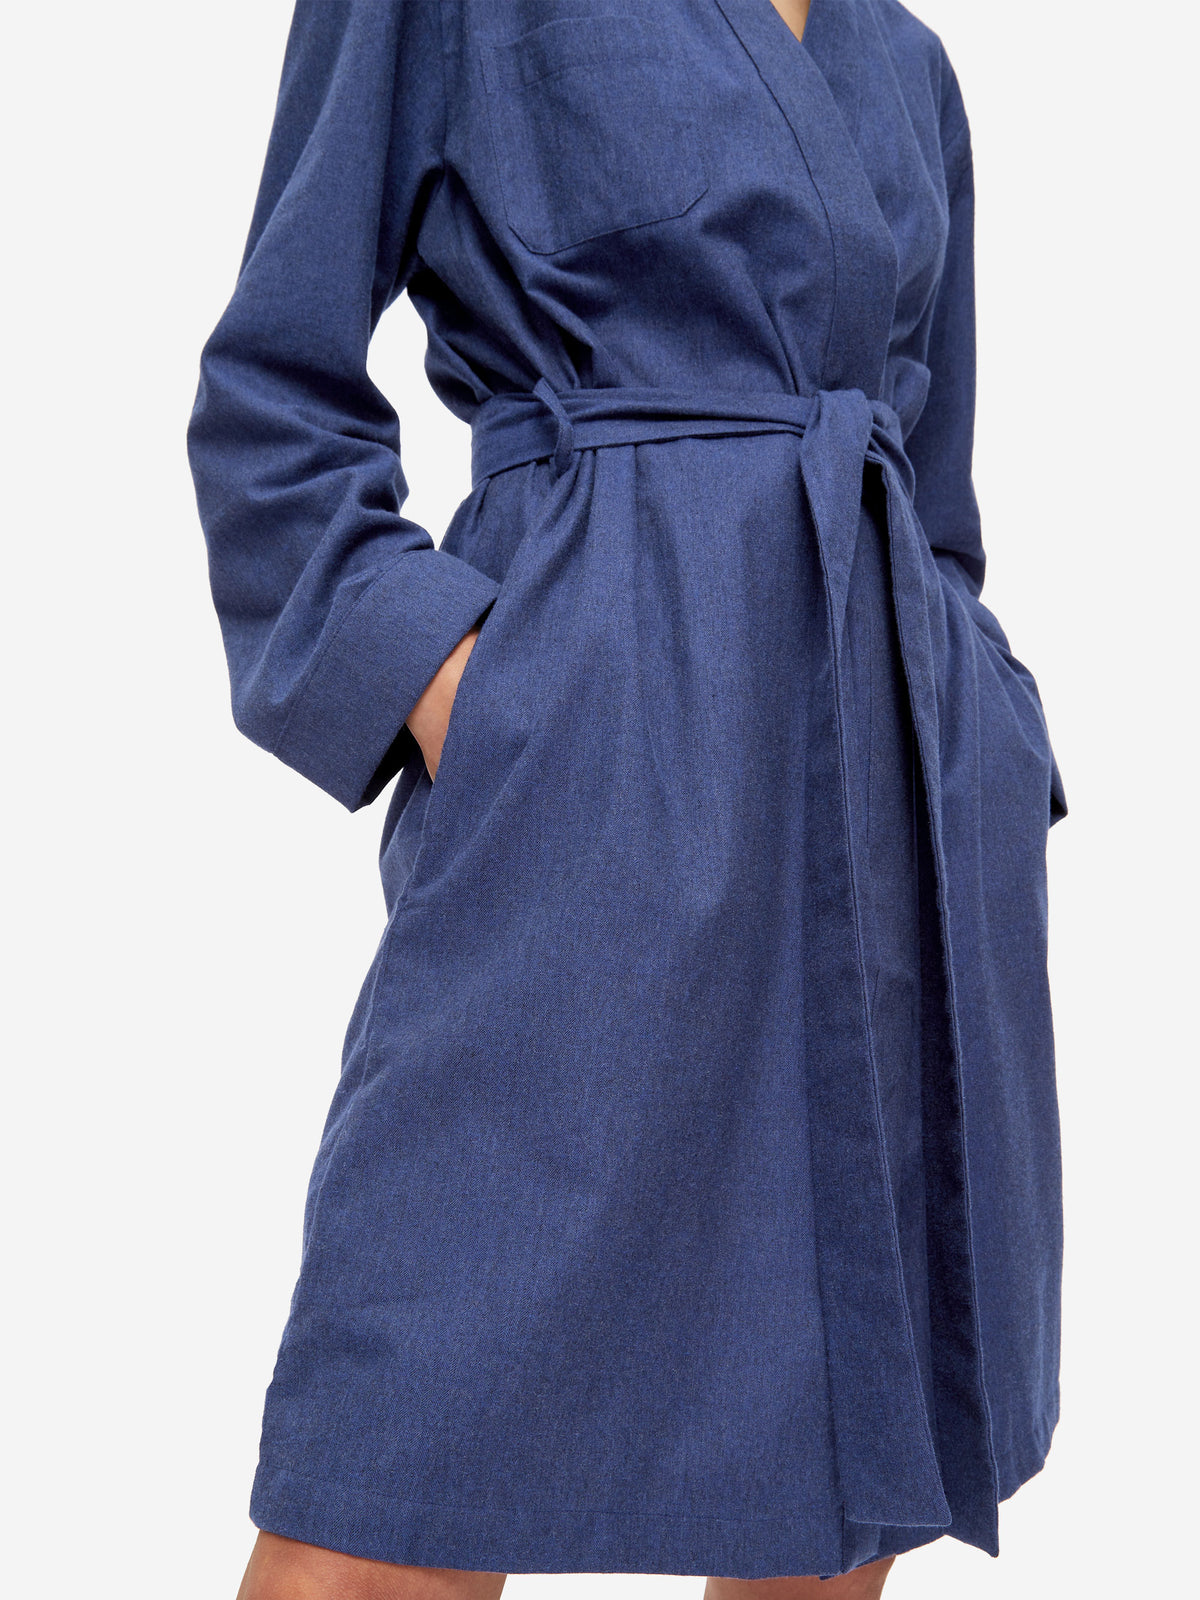 Women's Dressing Gown Balmoral 3 Brushed Cotton Navy